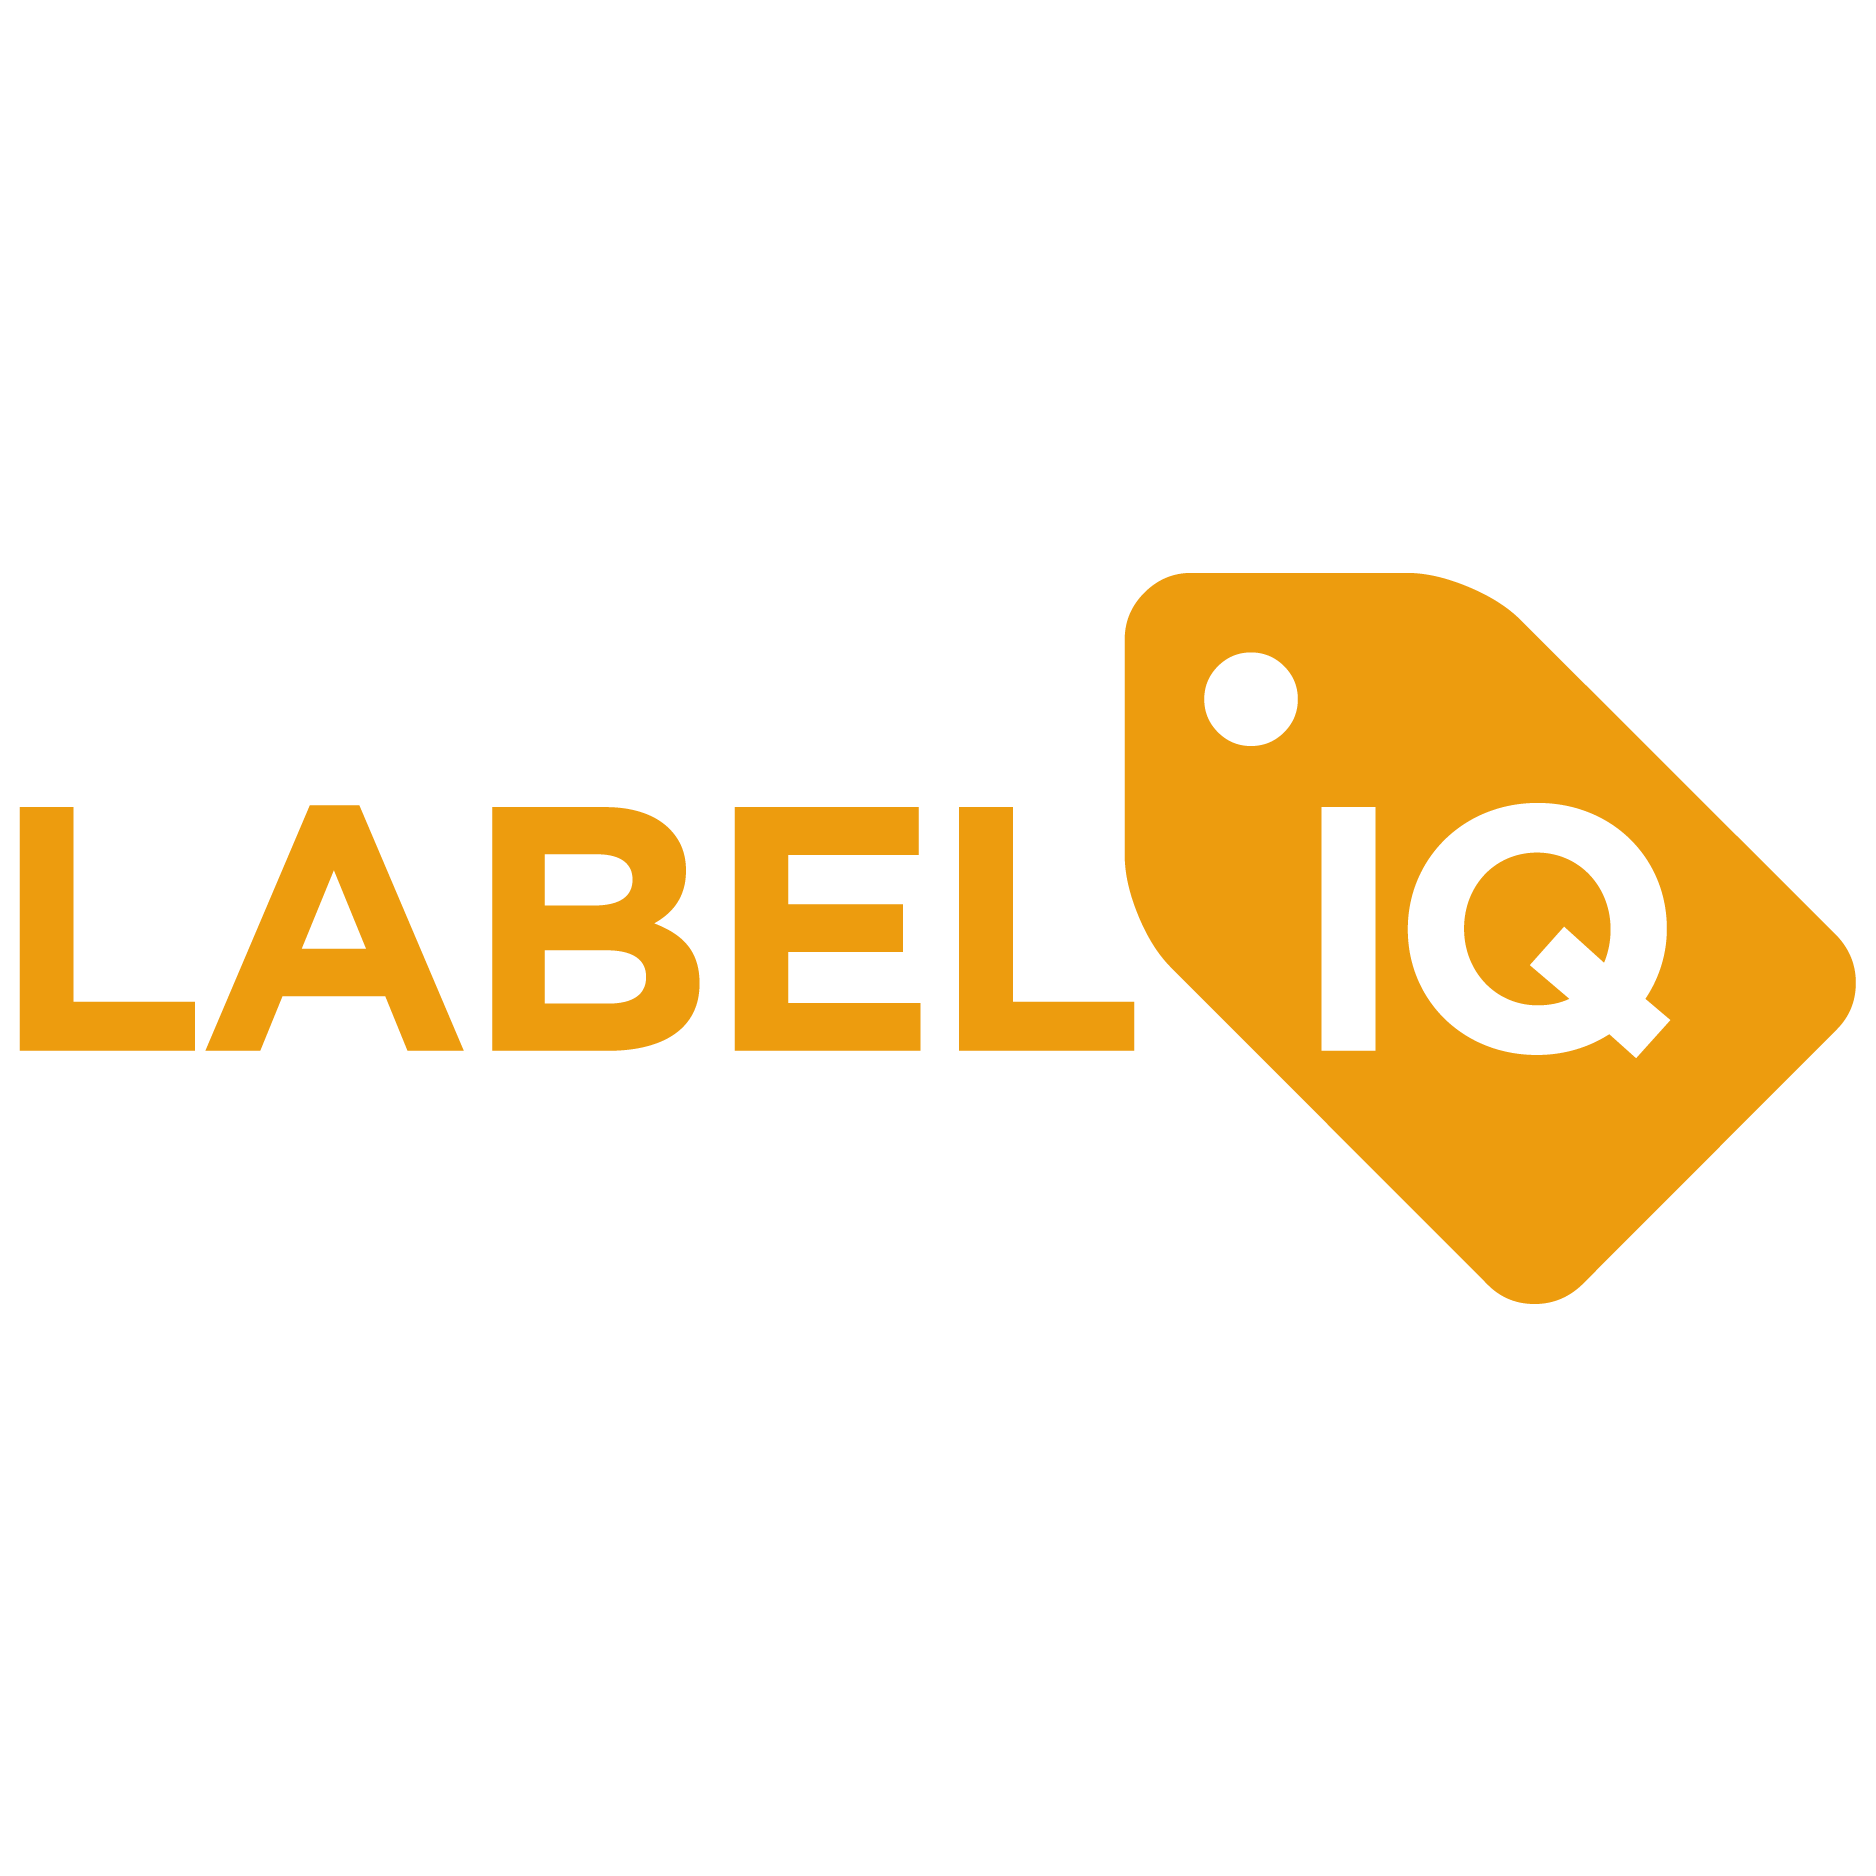 Label IQ logo design by logo designer LITTLE Agency for your inspiration and for the worlds largest logo competition